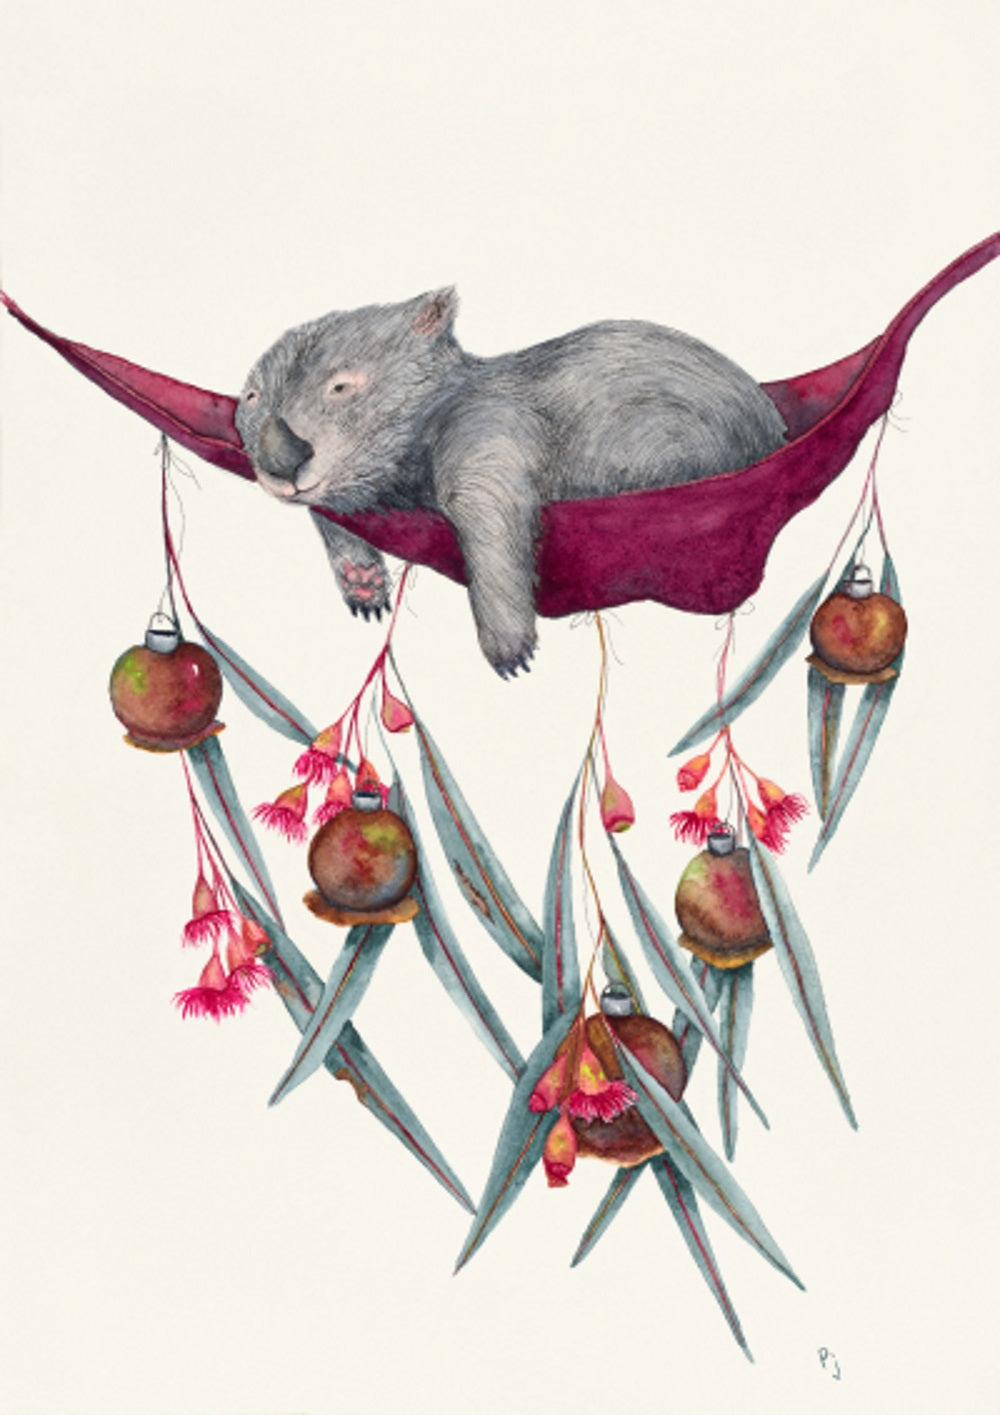 This is a print of my original watercolour painting of a sleepy wombat in a hammock. The hammock has been decorated with gum nuts and flowers. 